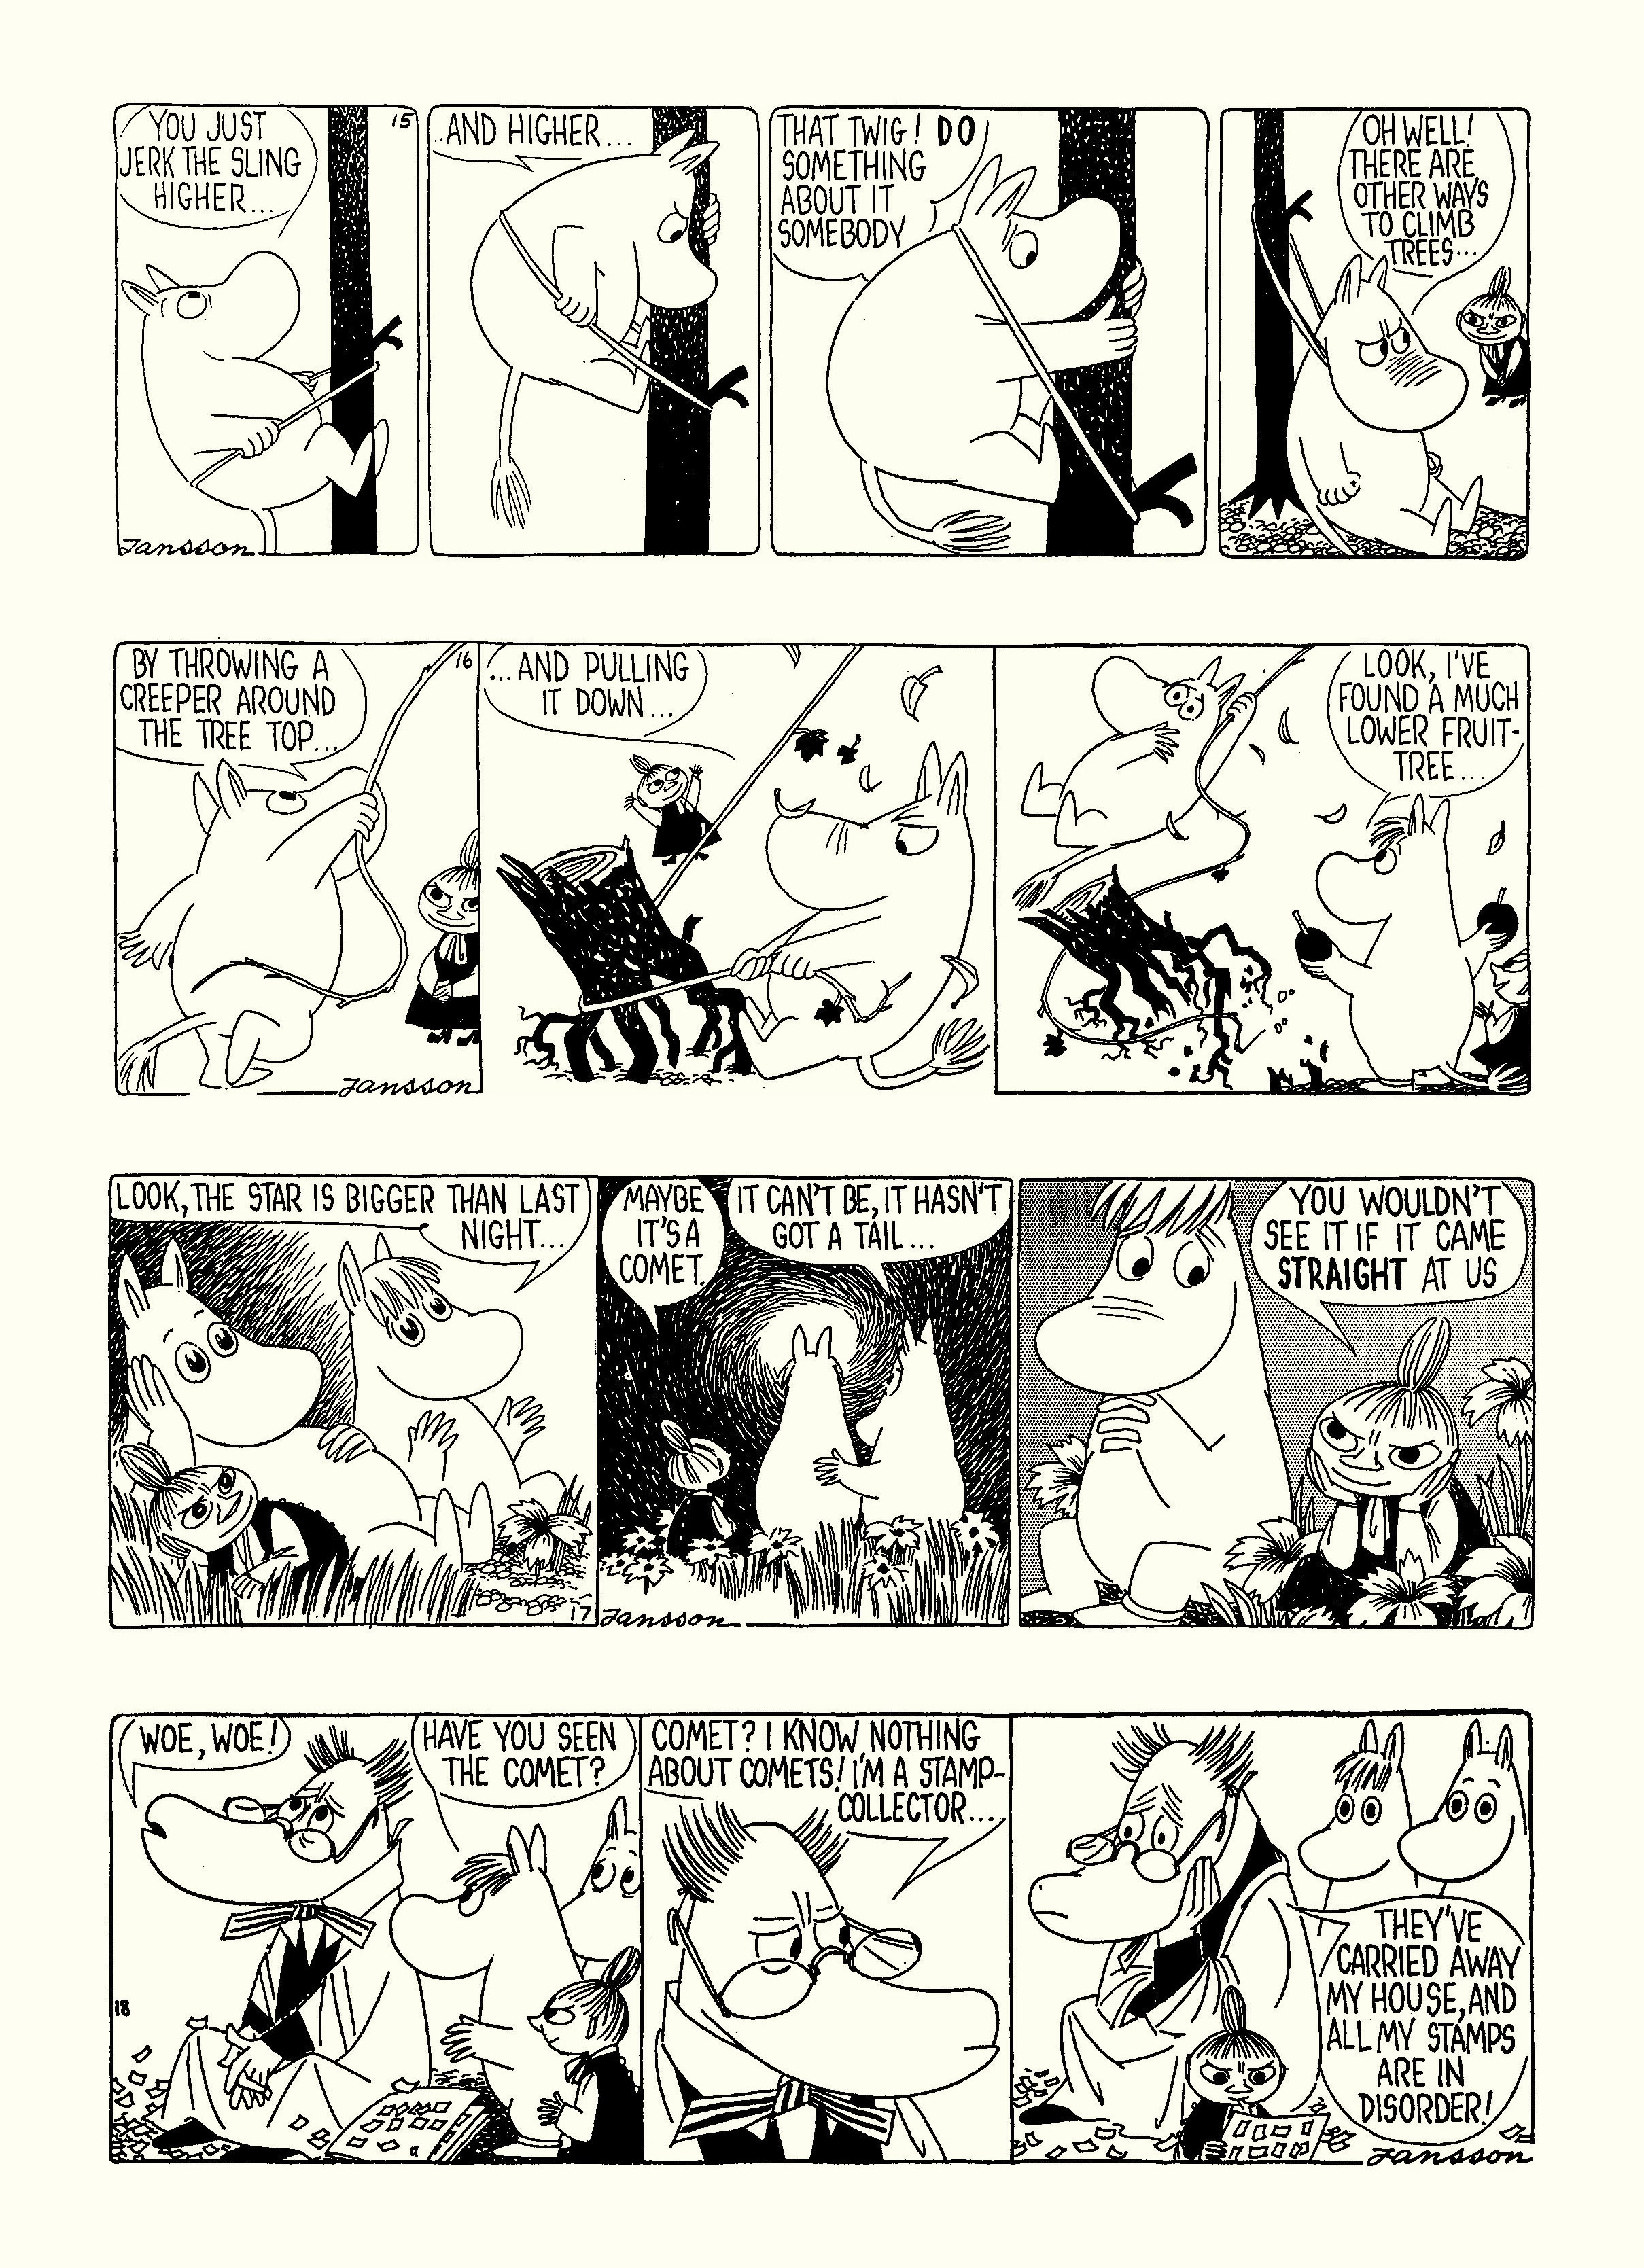 Read online Moomin: The Complete Tove Jansson Comic Strip comic -  Issue # TPB 4 - 62